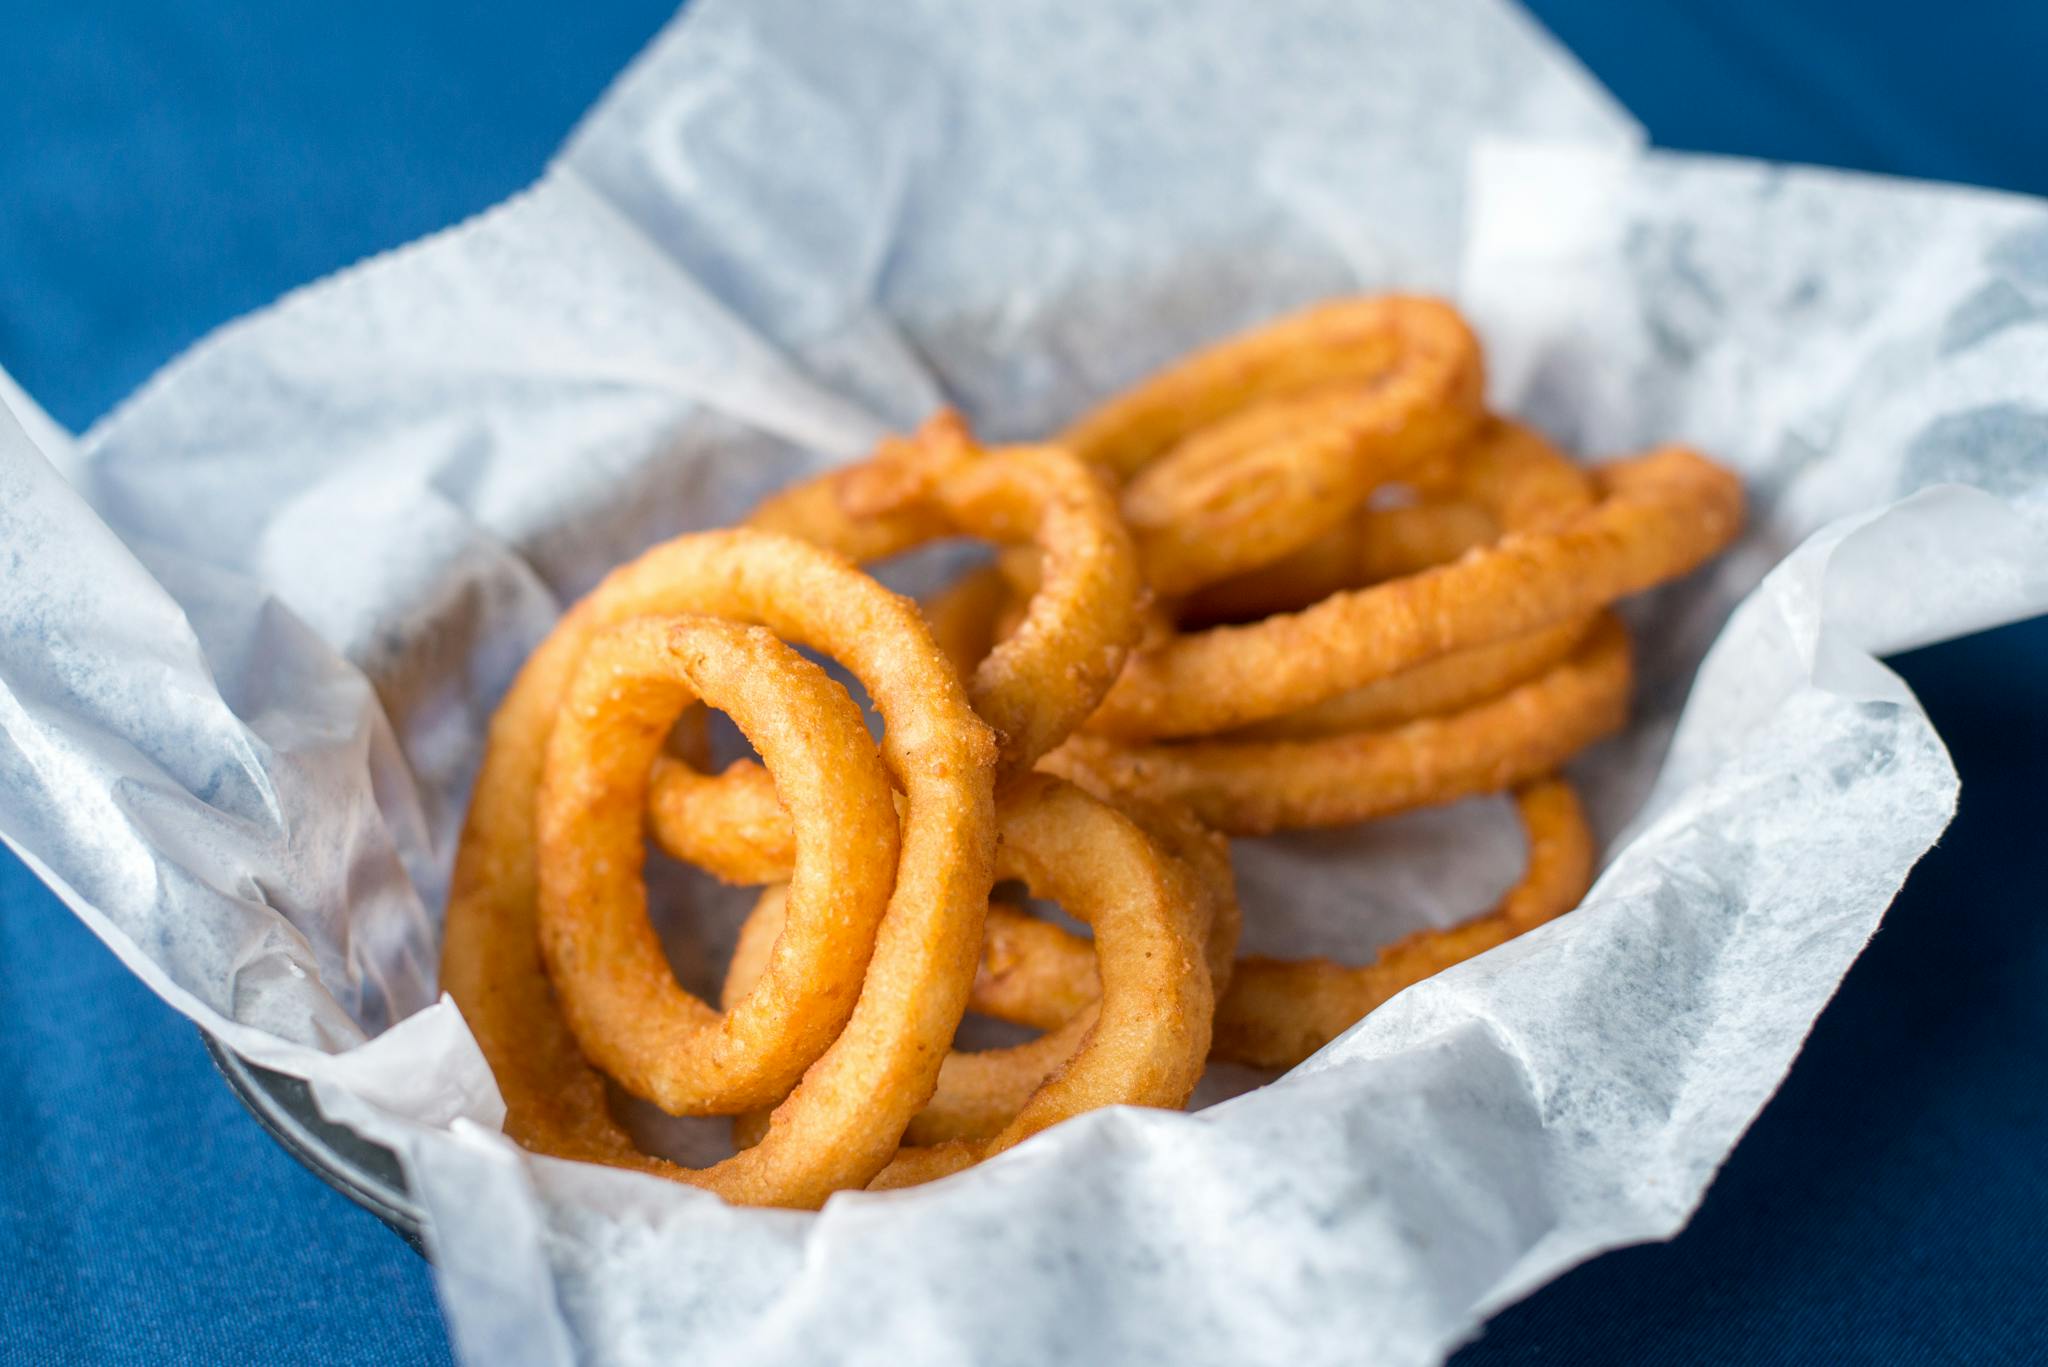 Onion Rings from Bourbon Street Bar in Green Bay, WI